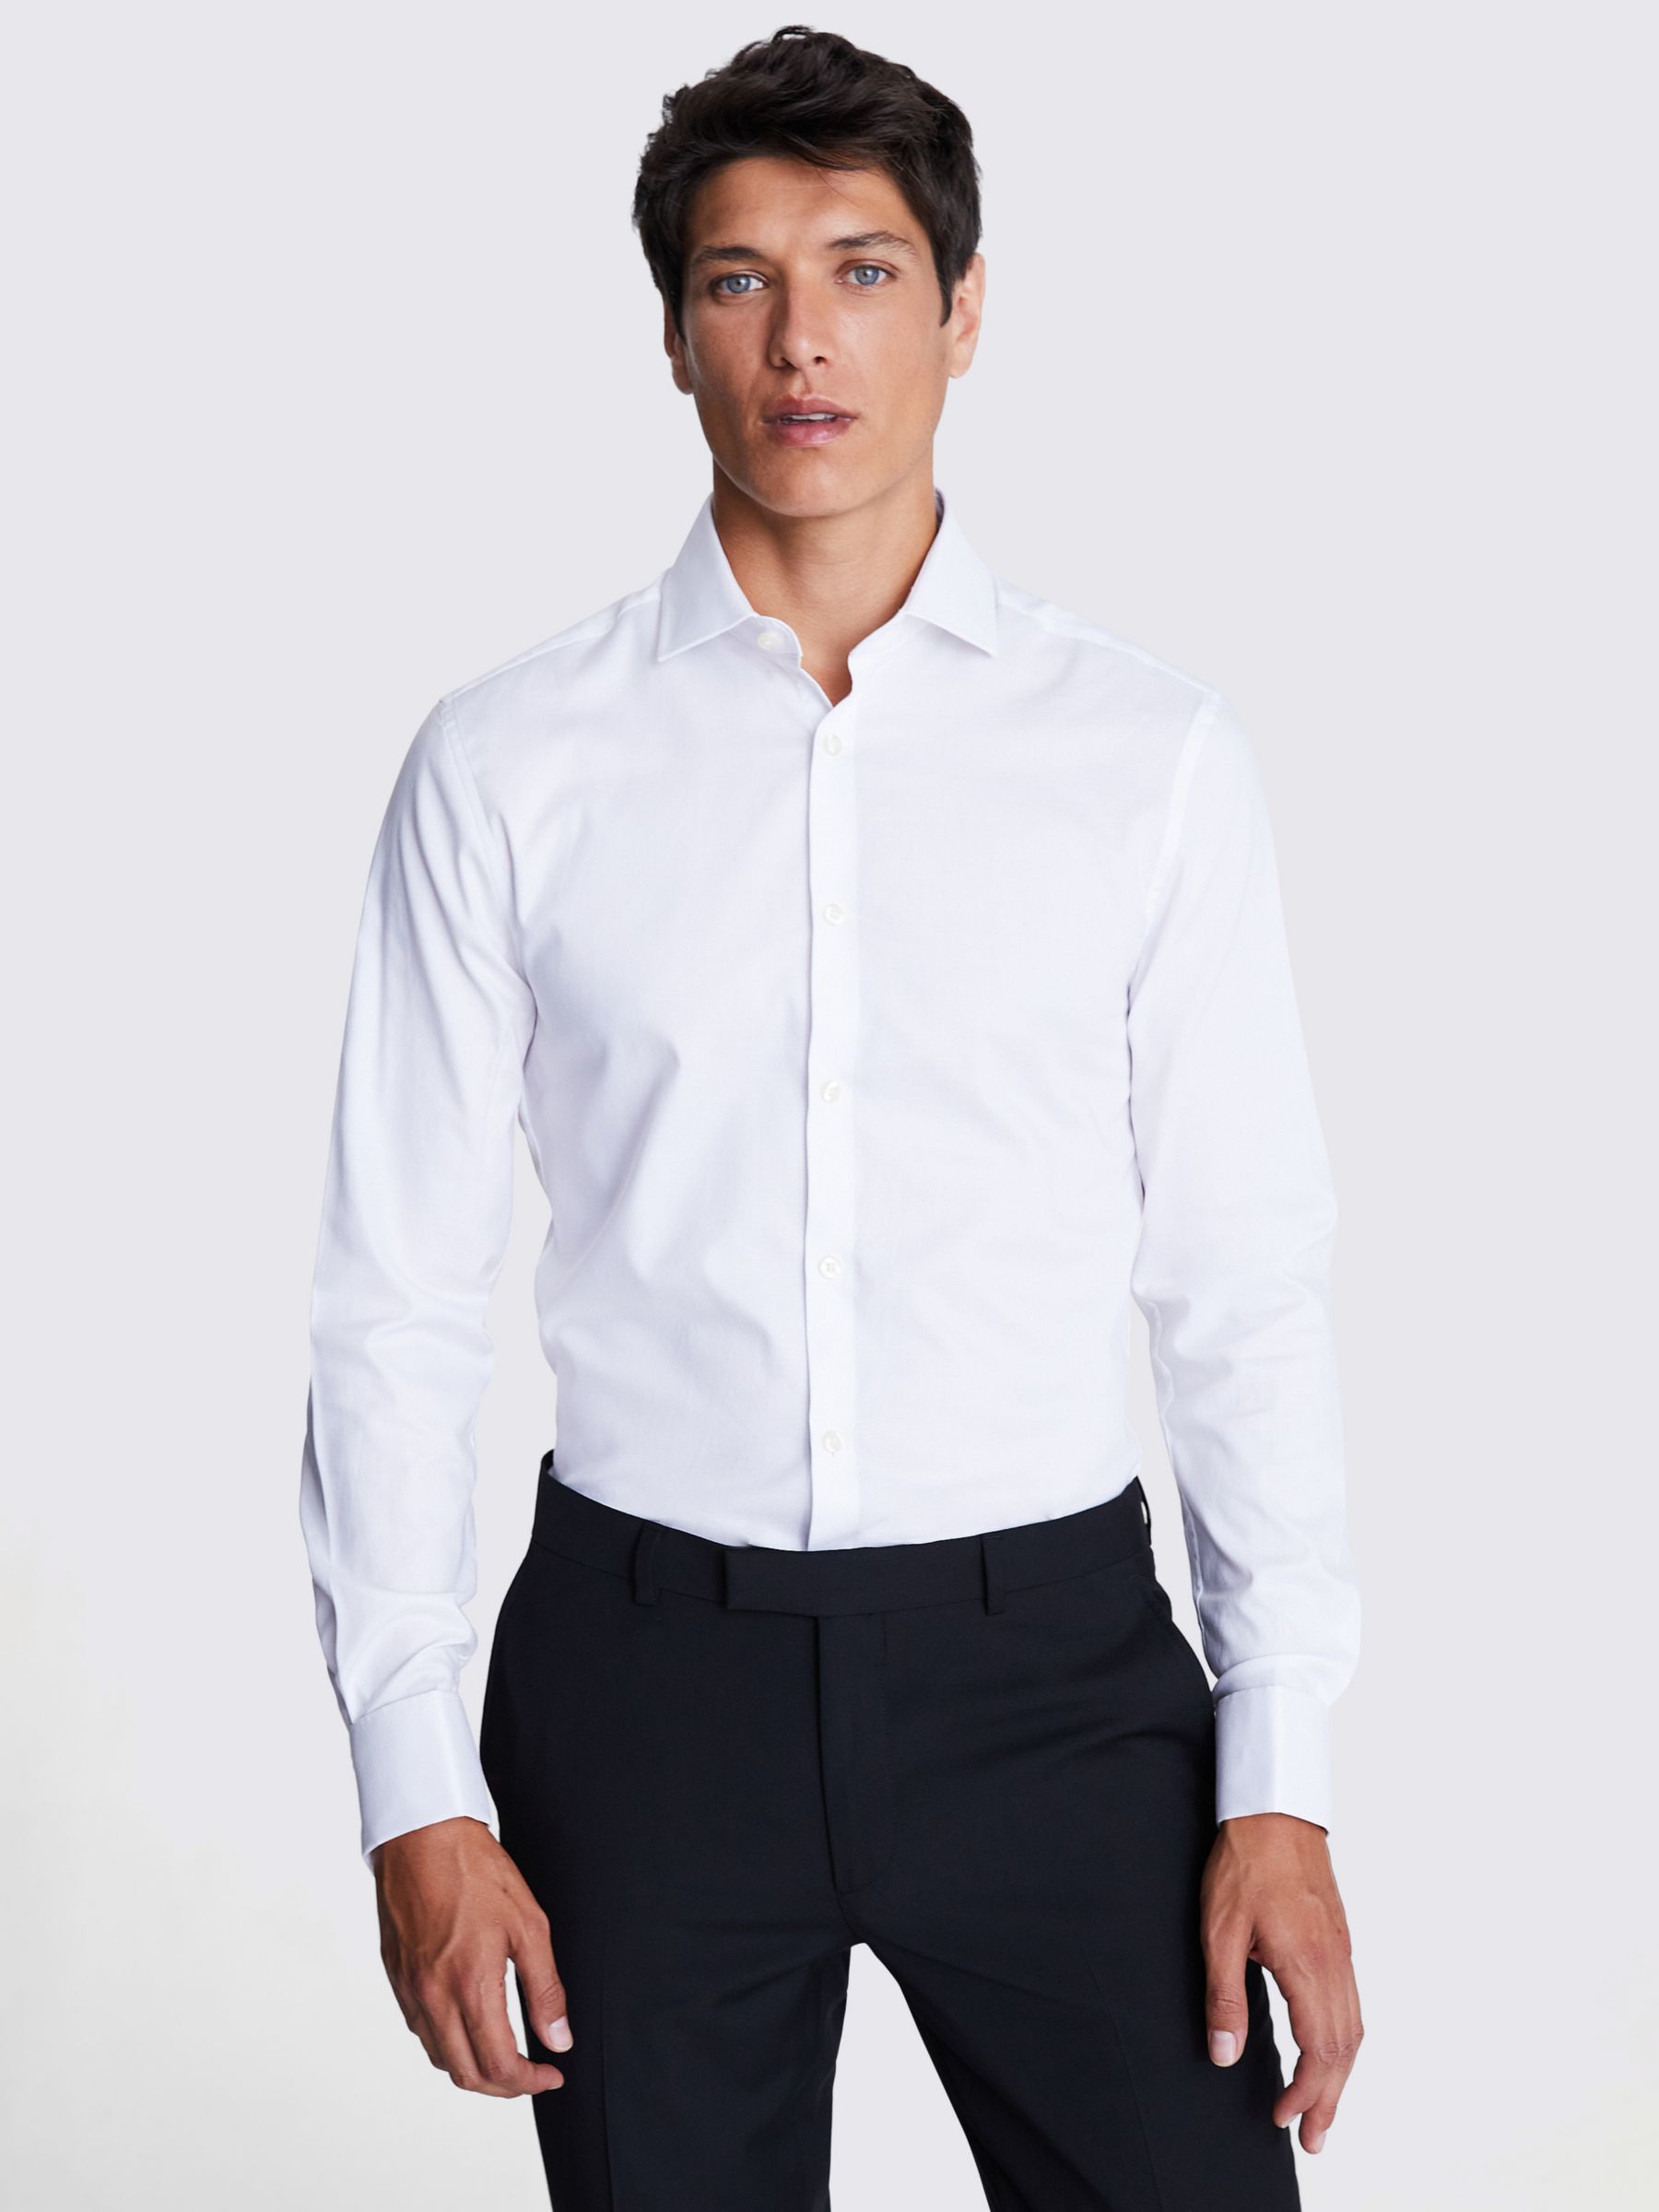 Moss Slim Fit Dobby Cotton Blend Stretch Double Cuff Shirt, White, 18